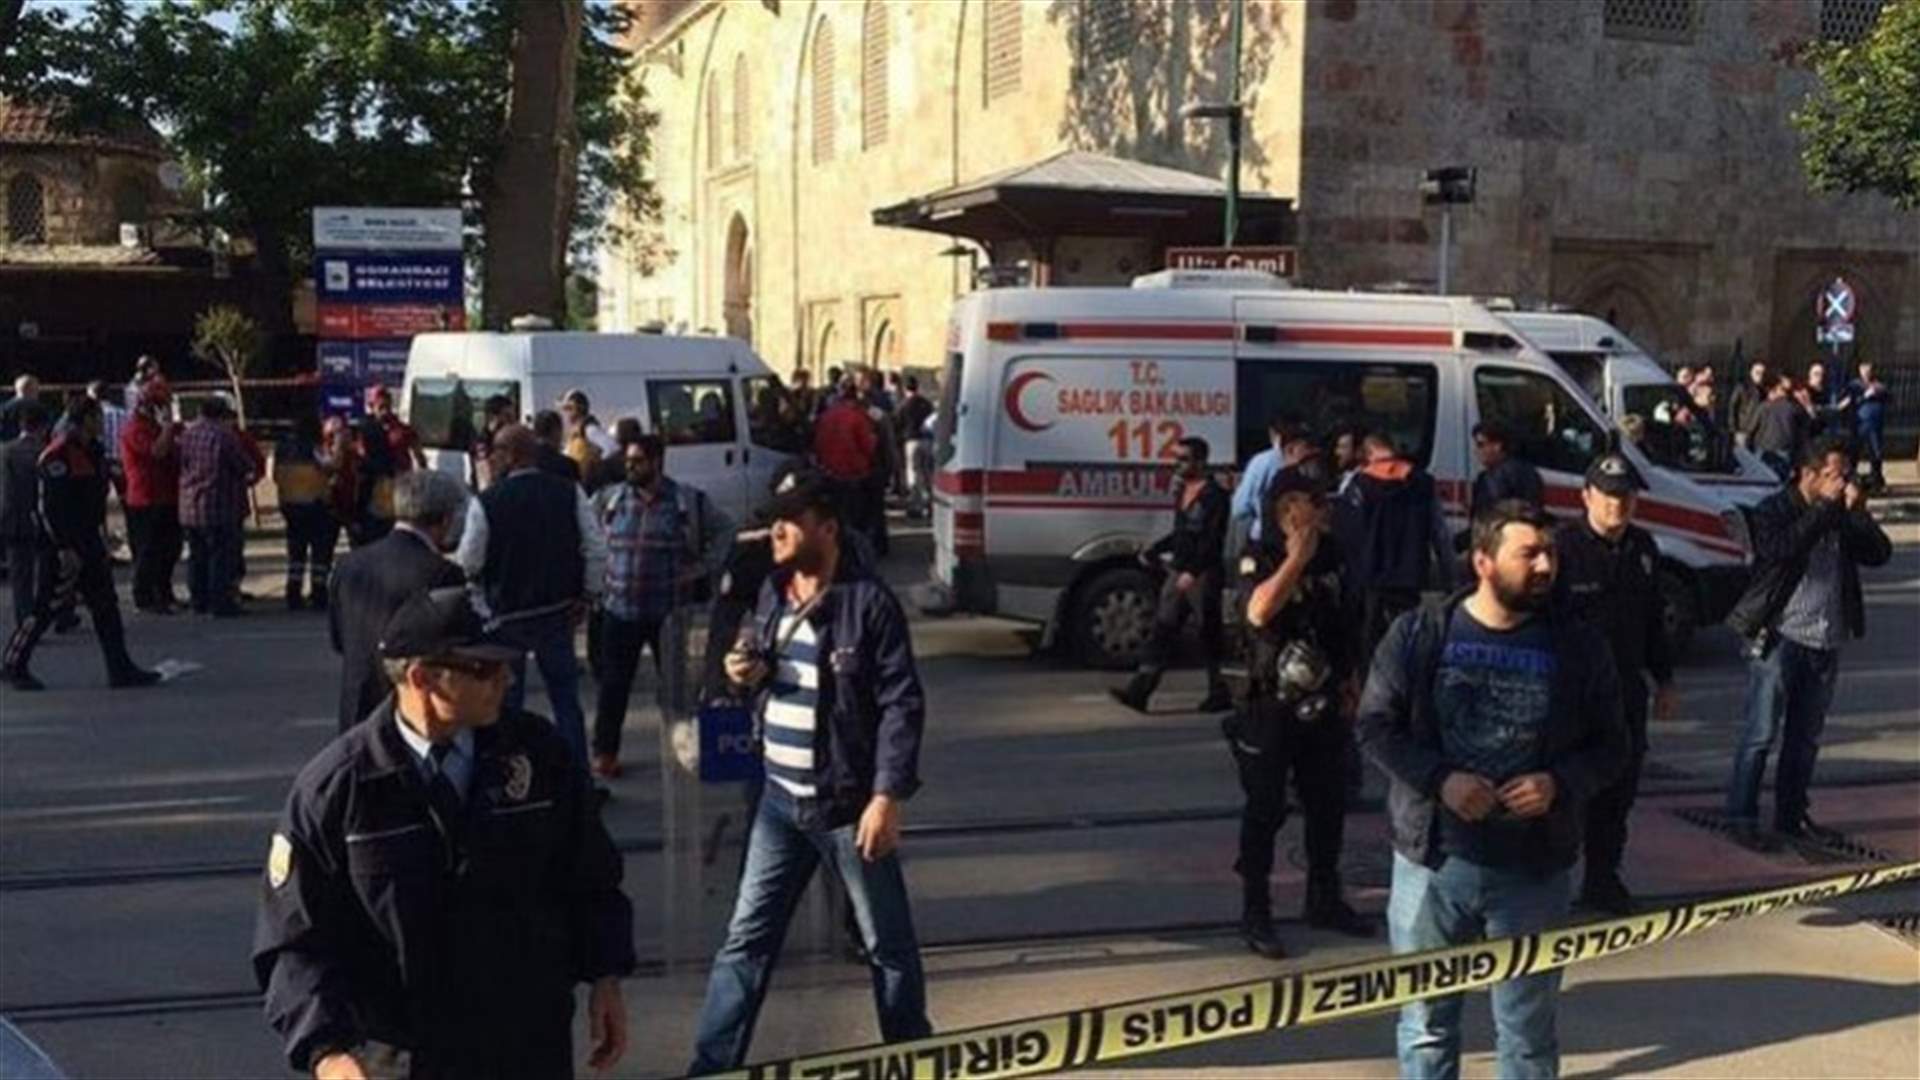 Fifteen people held over suicide bomb in Turkey - interior minister